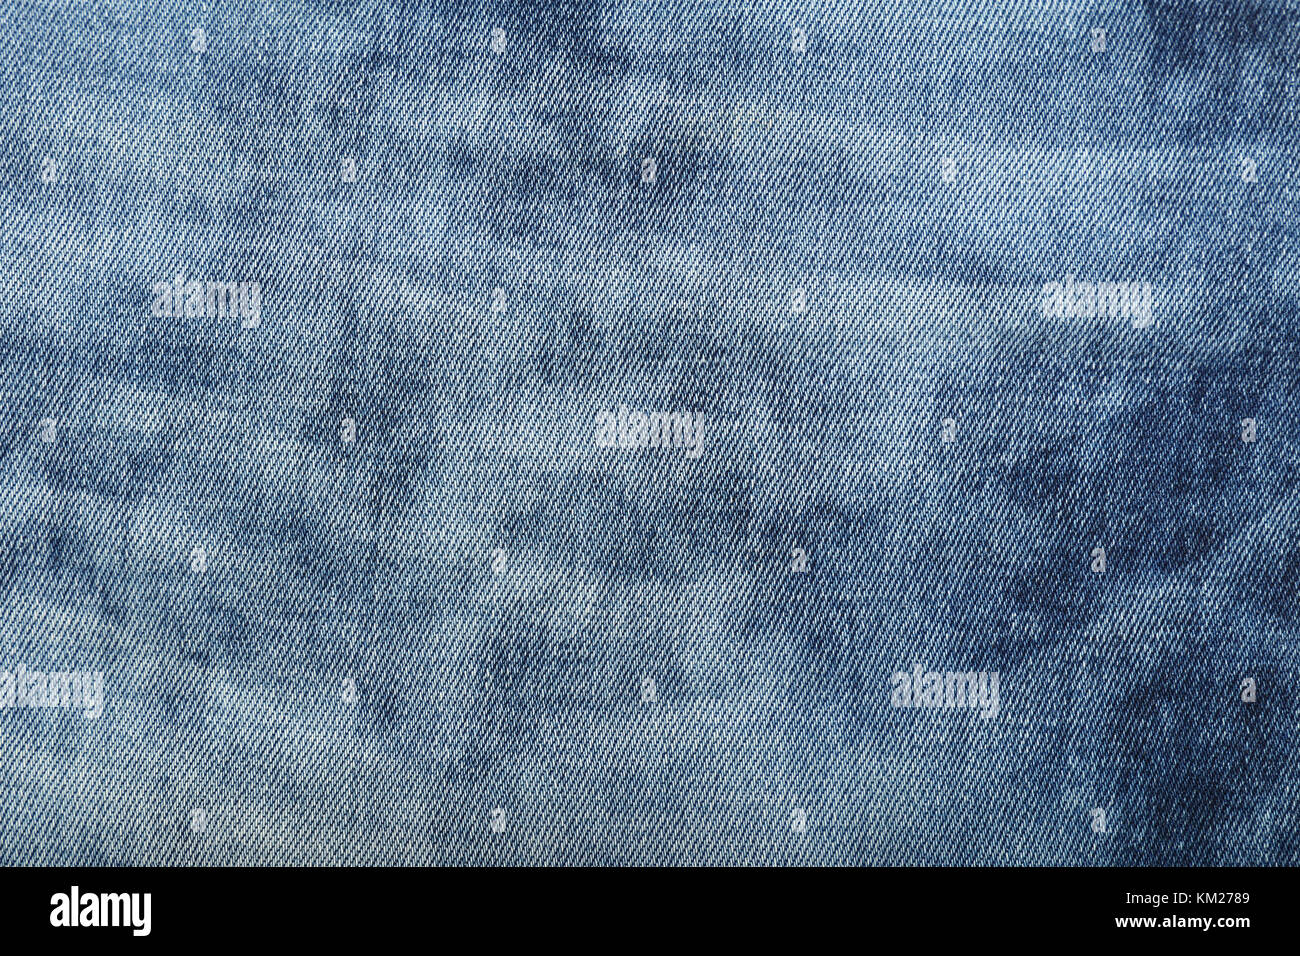 Dark indigo blue cotton jeans denim texture background with light washed distressed faded area, close up Stock Photo